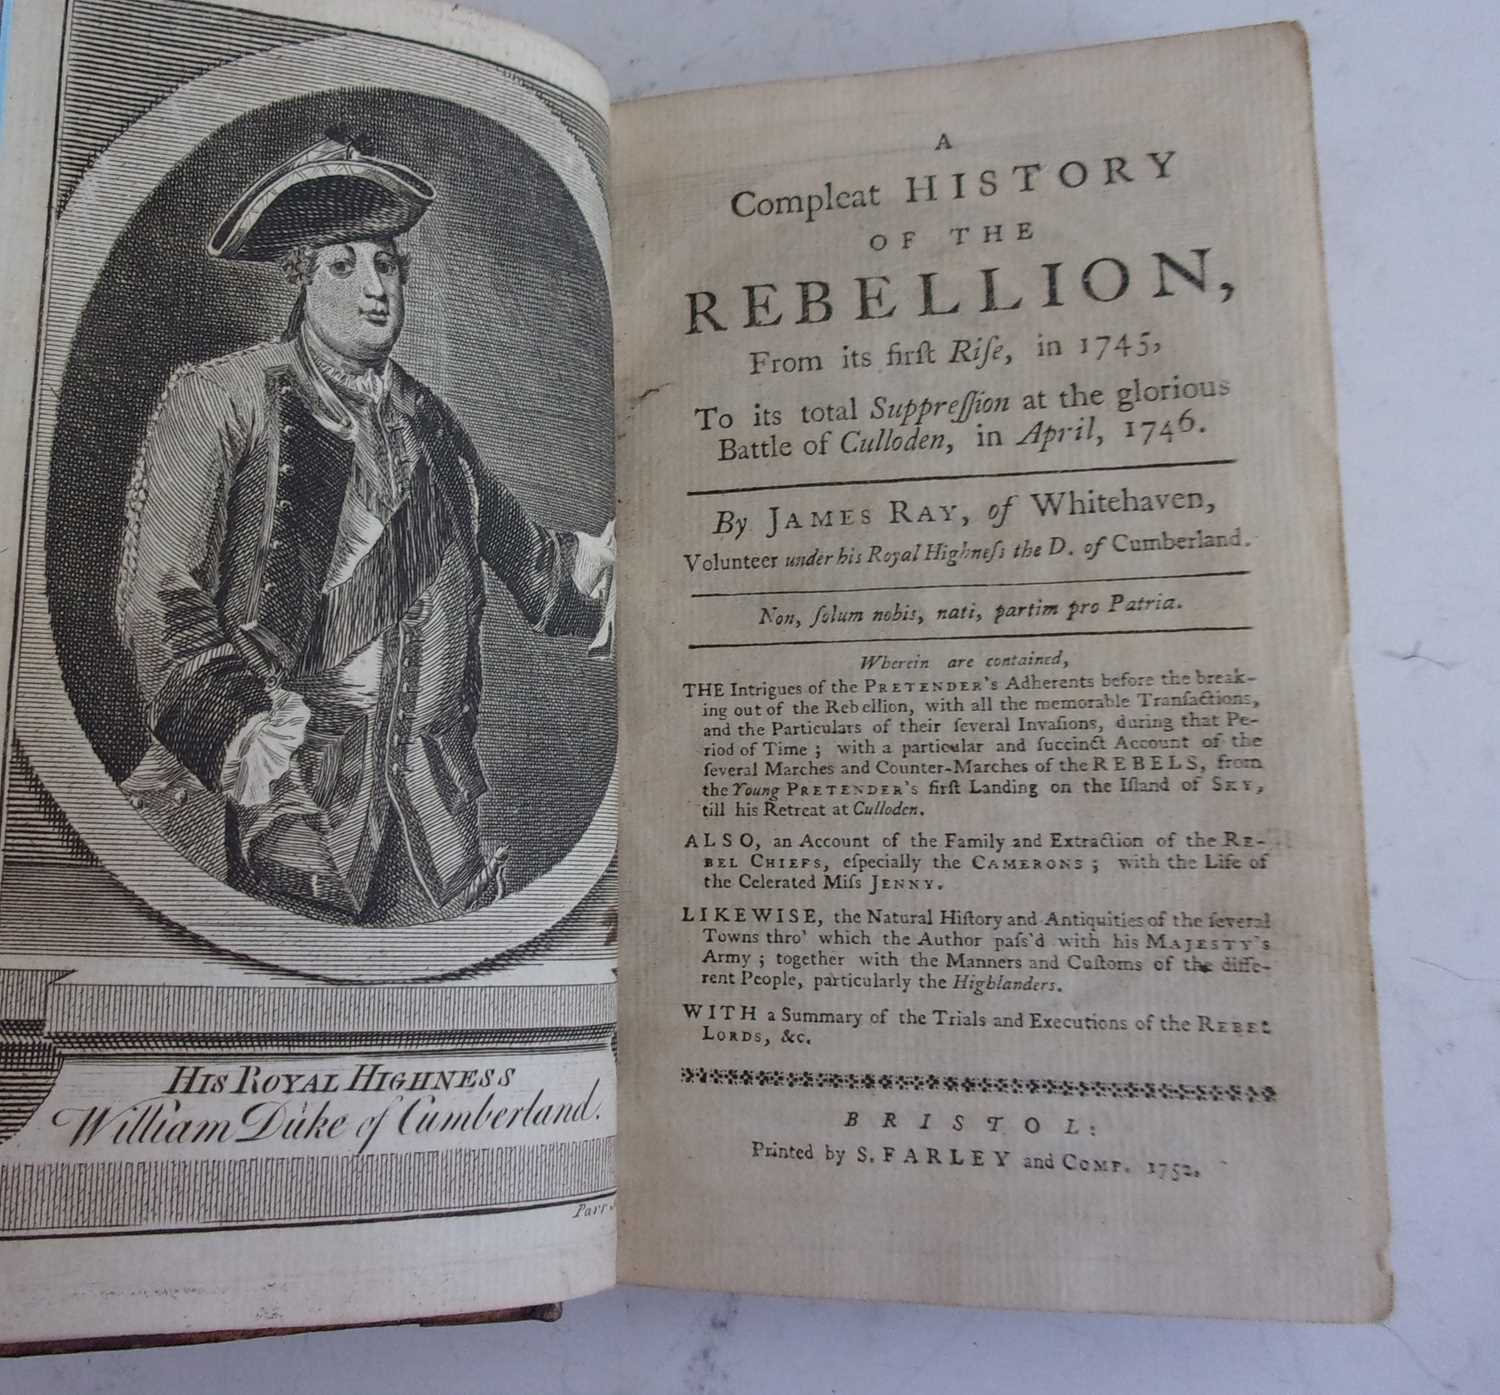 RAY, James. A Compleat History of the Rebellion from its First Rise in 1745……. S. Farley, Bristol, - Image 2 of 3